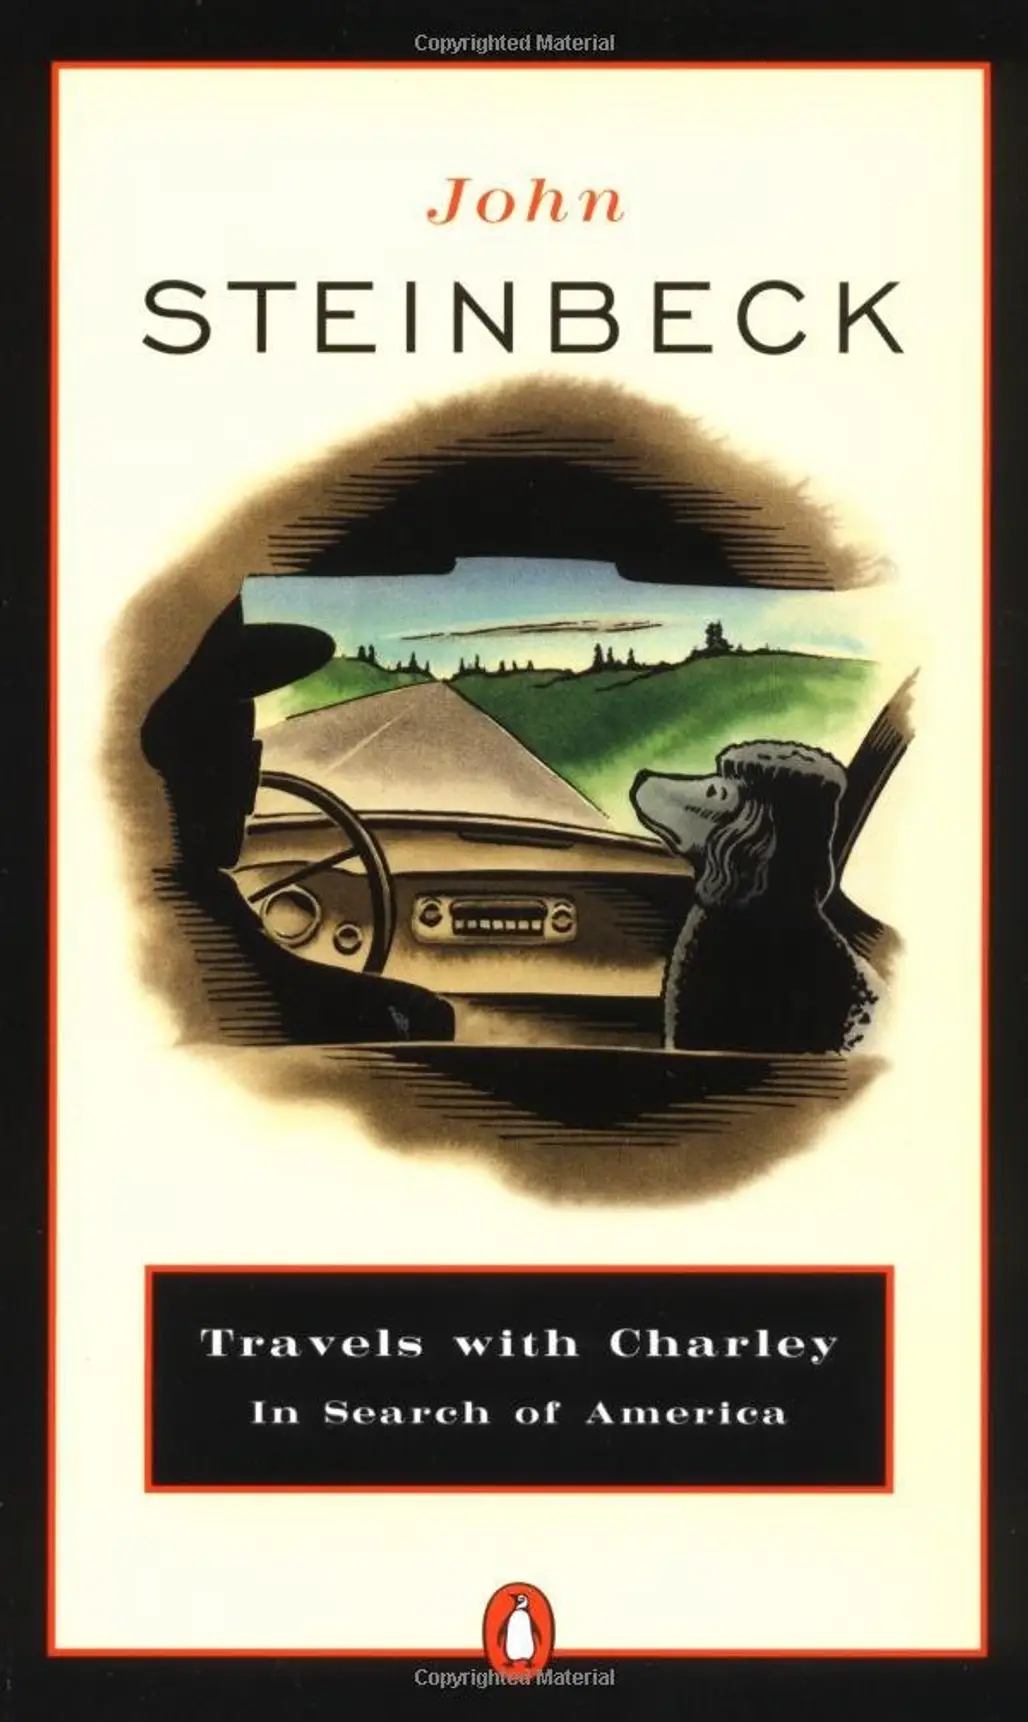 Travels with Charley: in Search of America by John Steinbeck